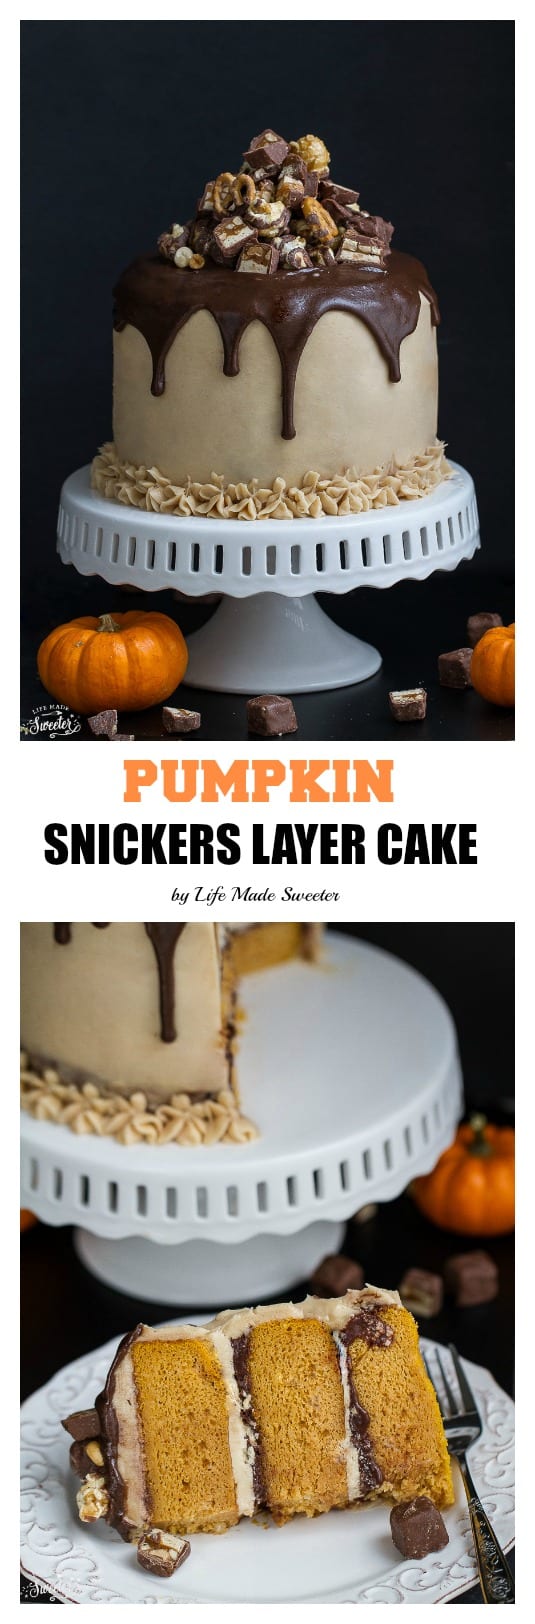 Pumpkin Snickers Layer Cake with Salted Caramel Frosting makes an impressive dessert for any holiday.